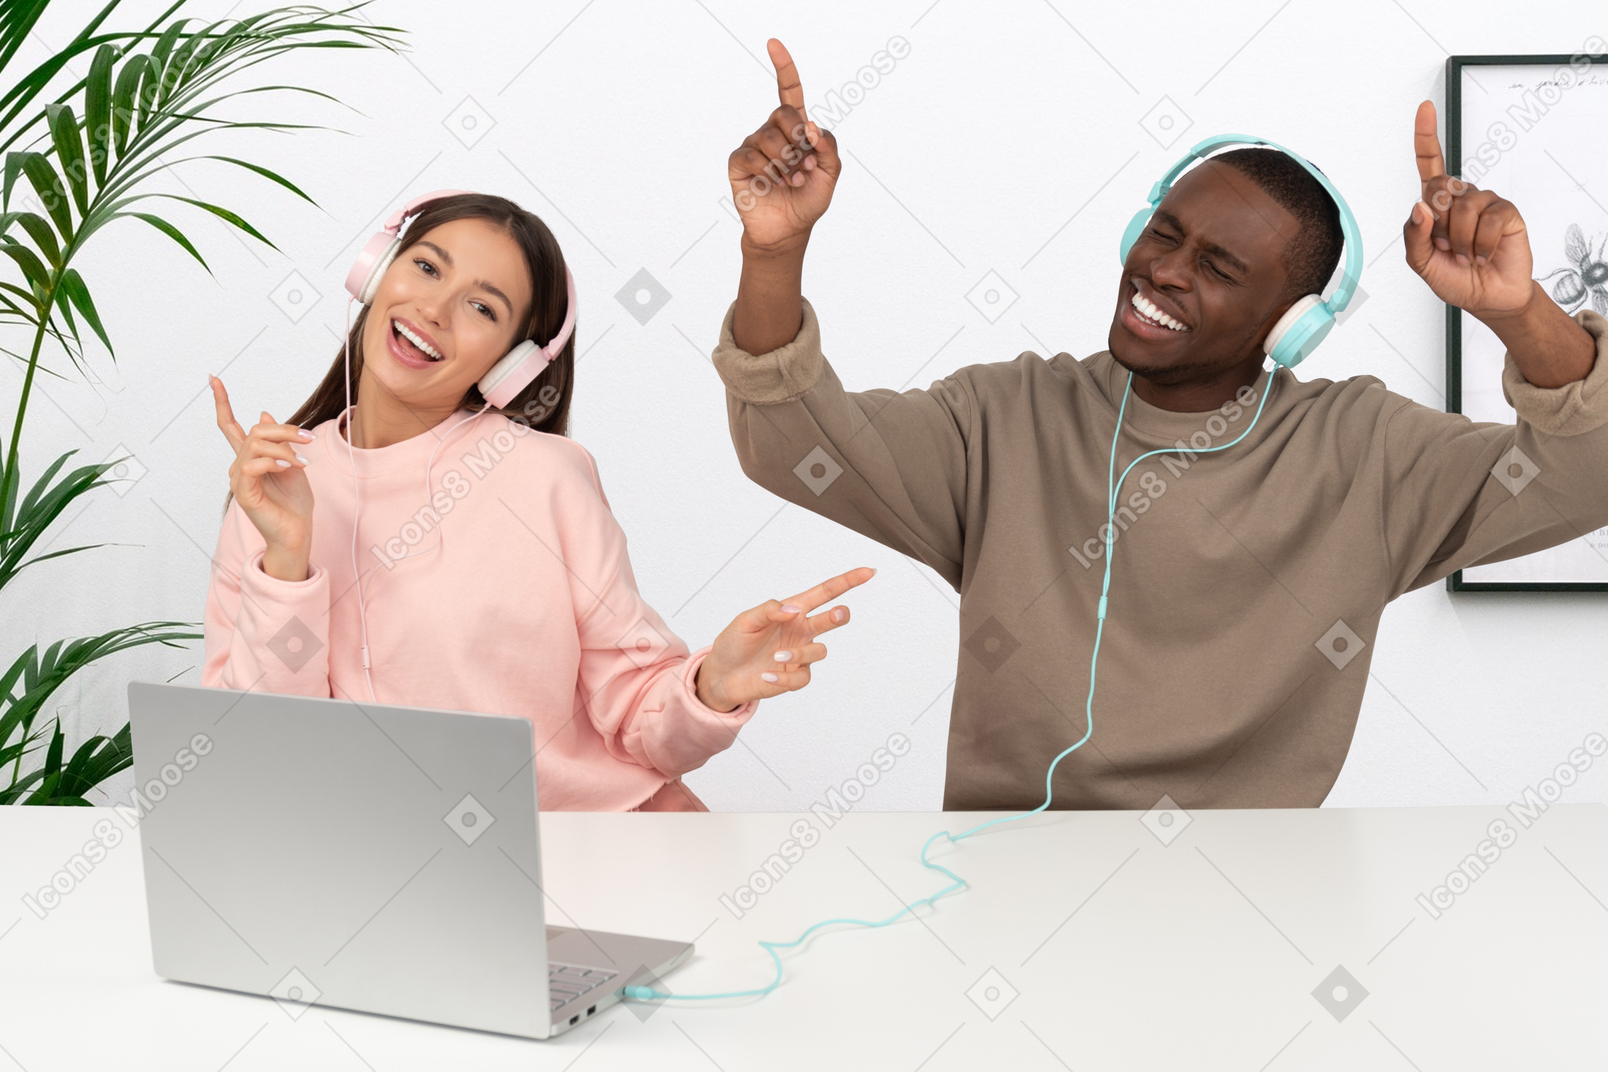 A man and a woman listening to music from laptop